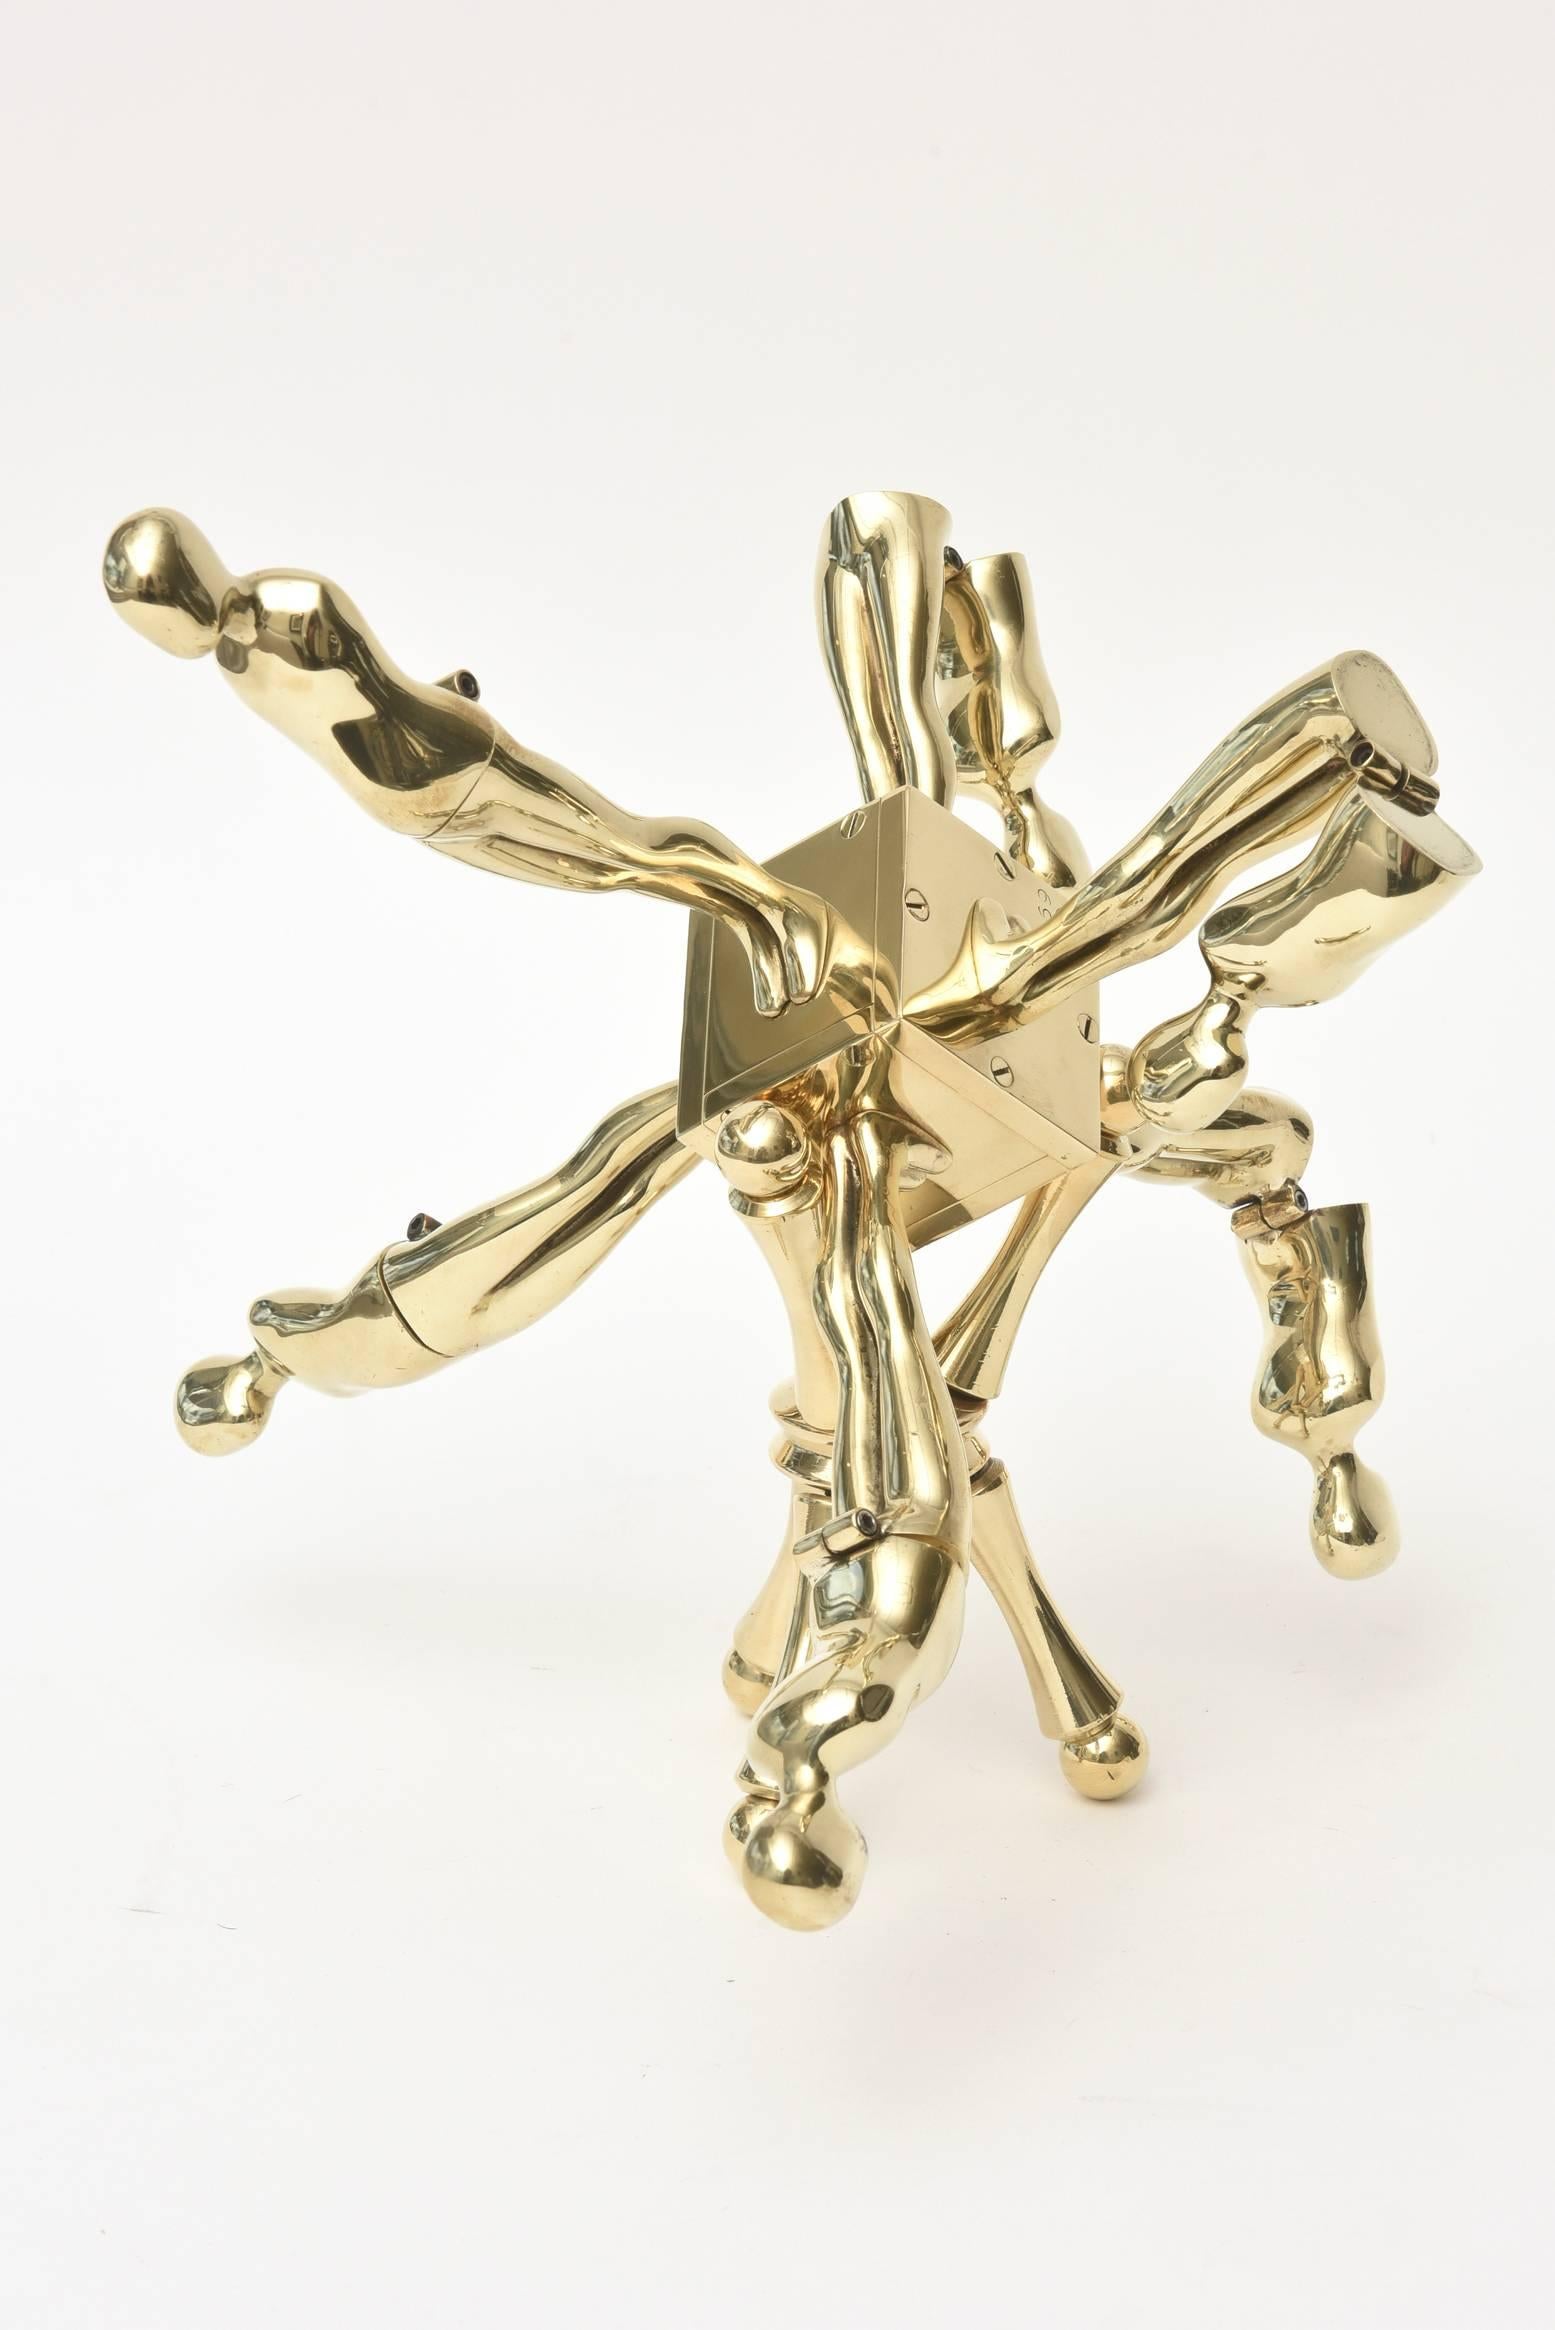 This amazing two part one of kind Ernest Trova vintage sculpture is polished brass. It is from his falling man subject and what he is most coveted for and known for. Each part as you can see from the photos reticulate downward. At any given time,